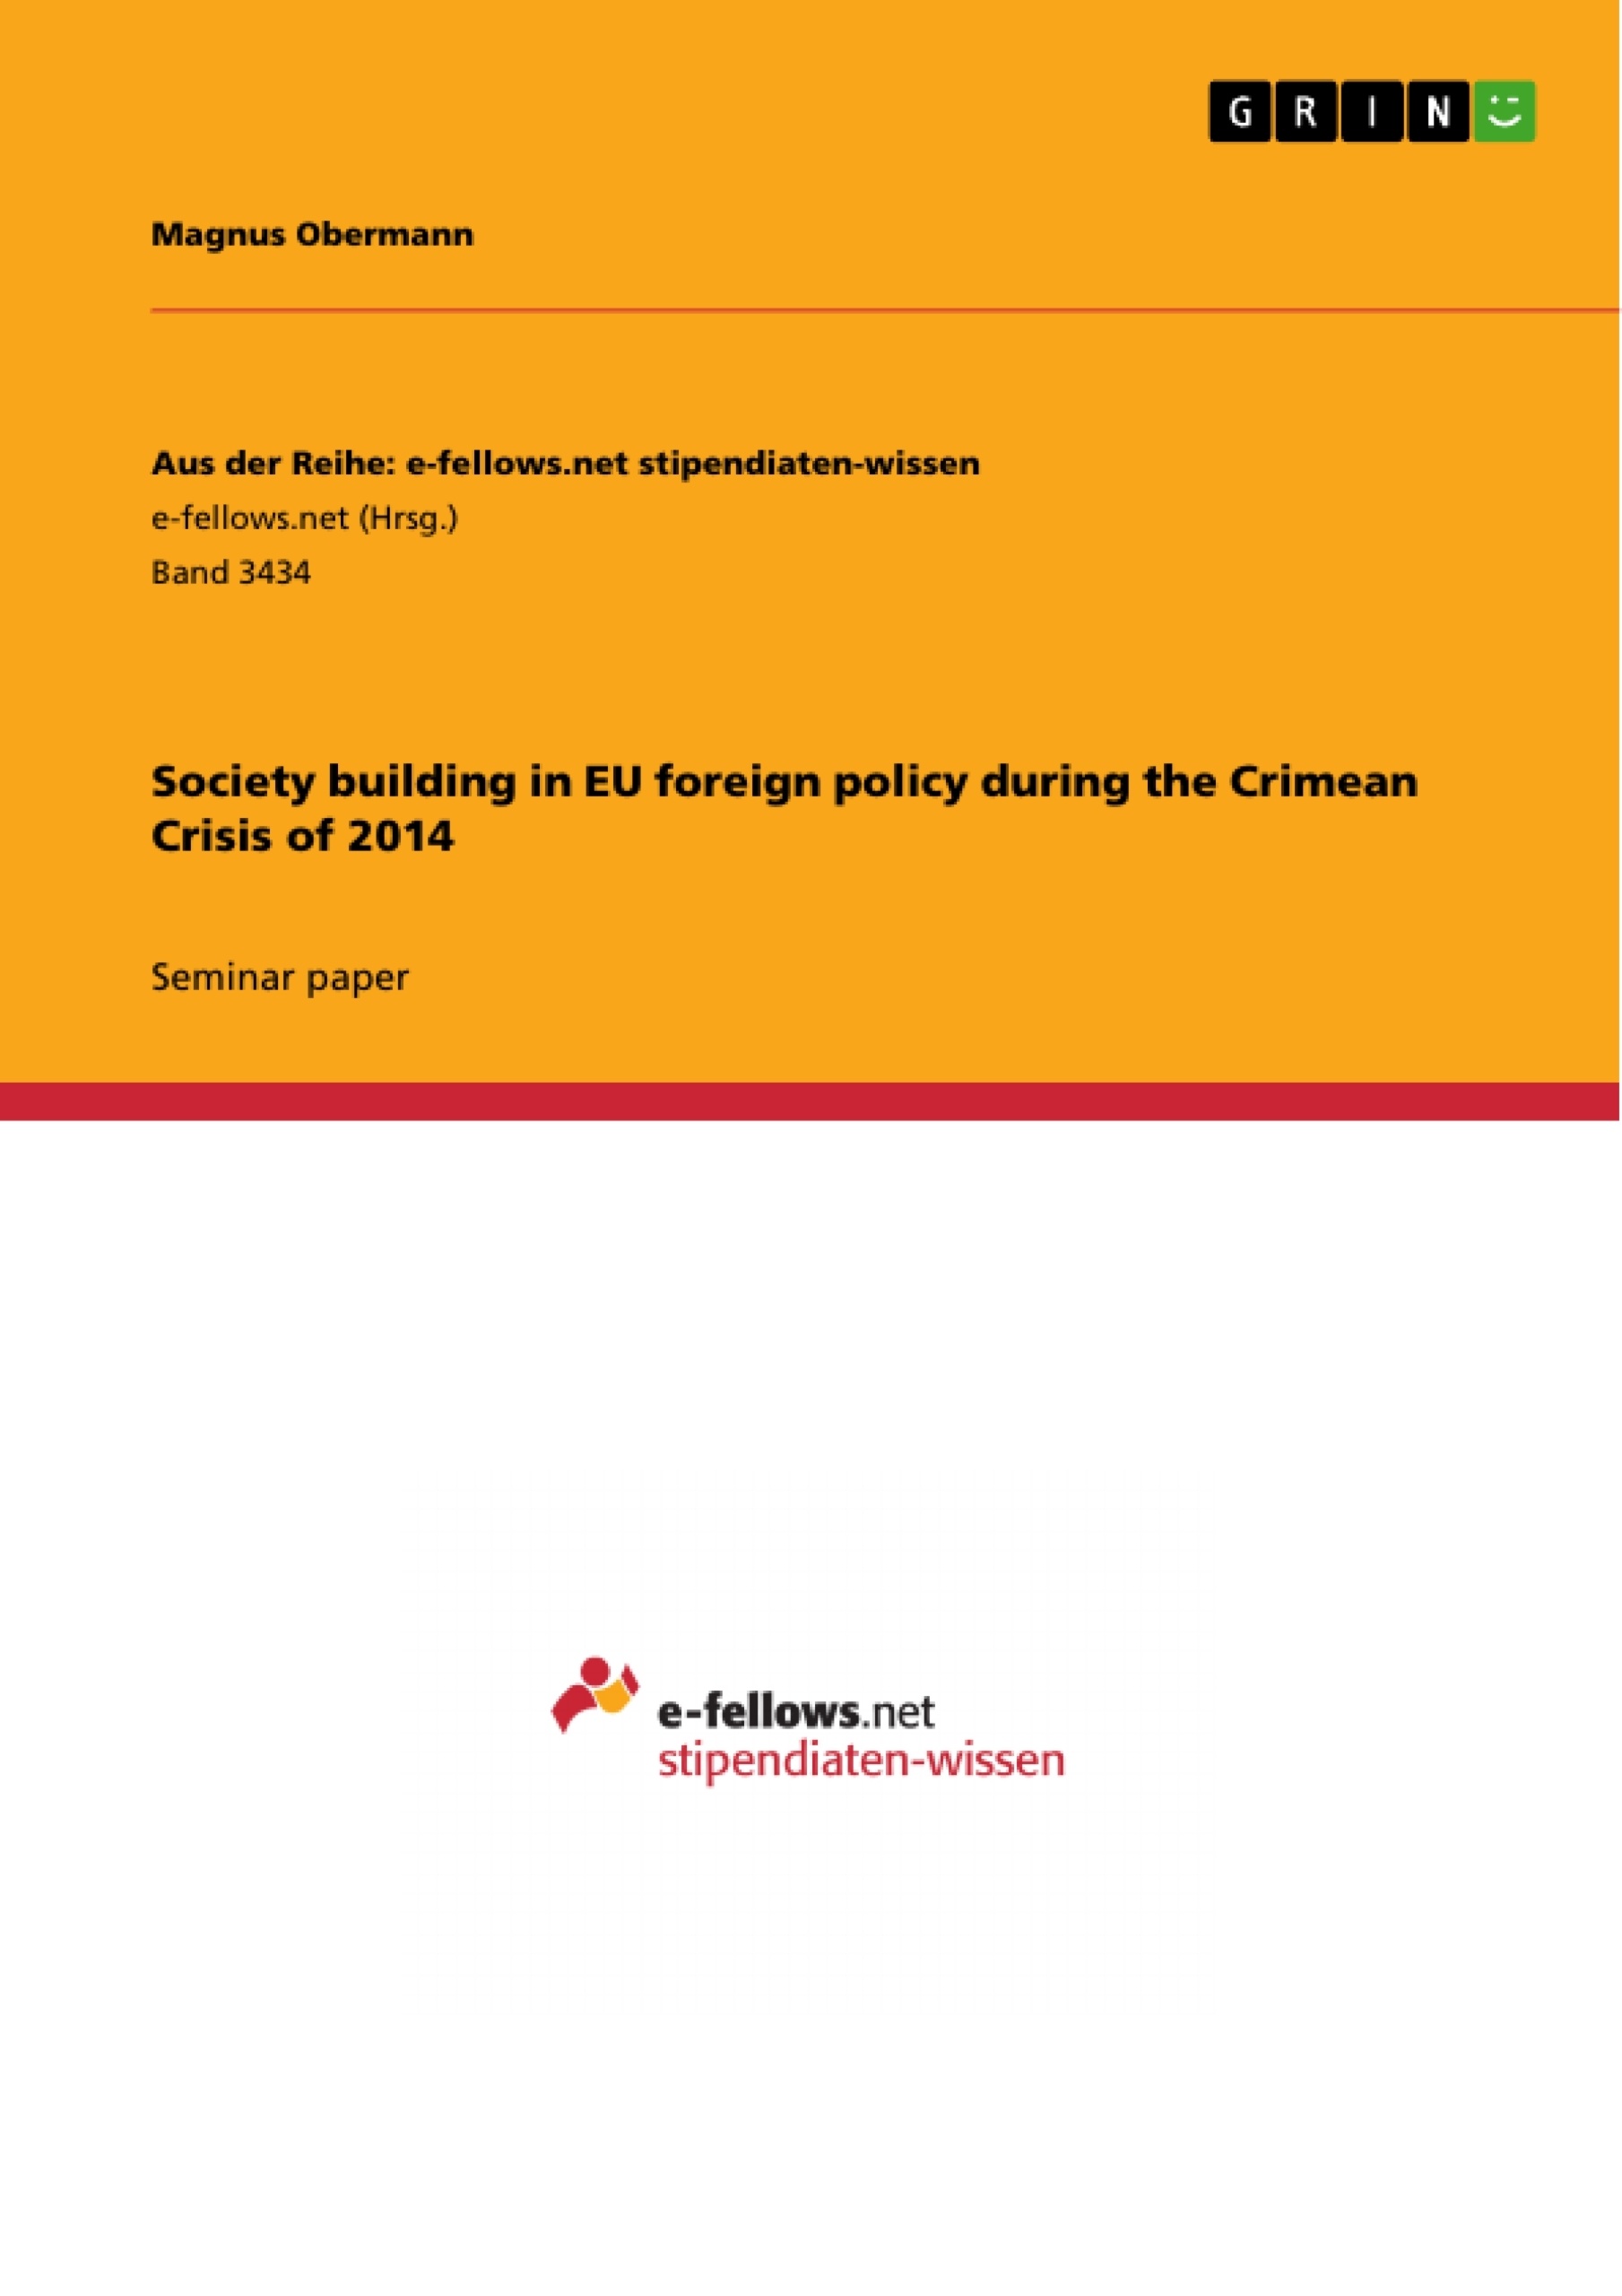 Title: Society building in EU foreign policy during the Crimean Crisis of 2014